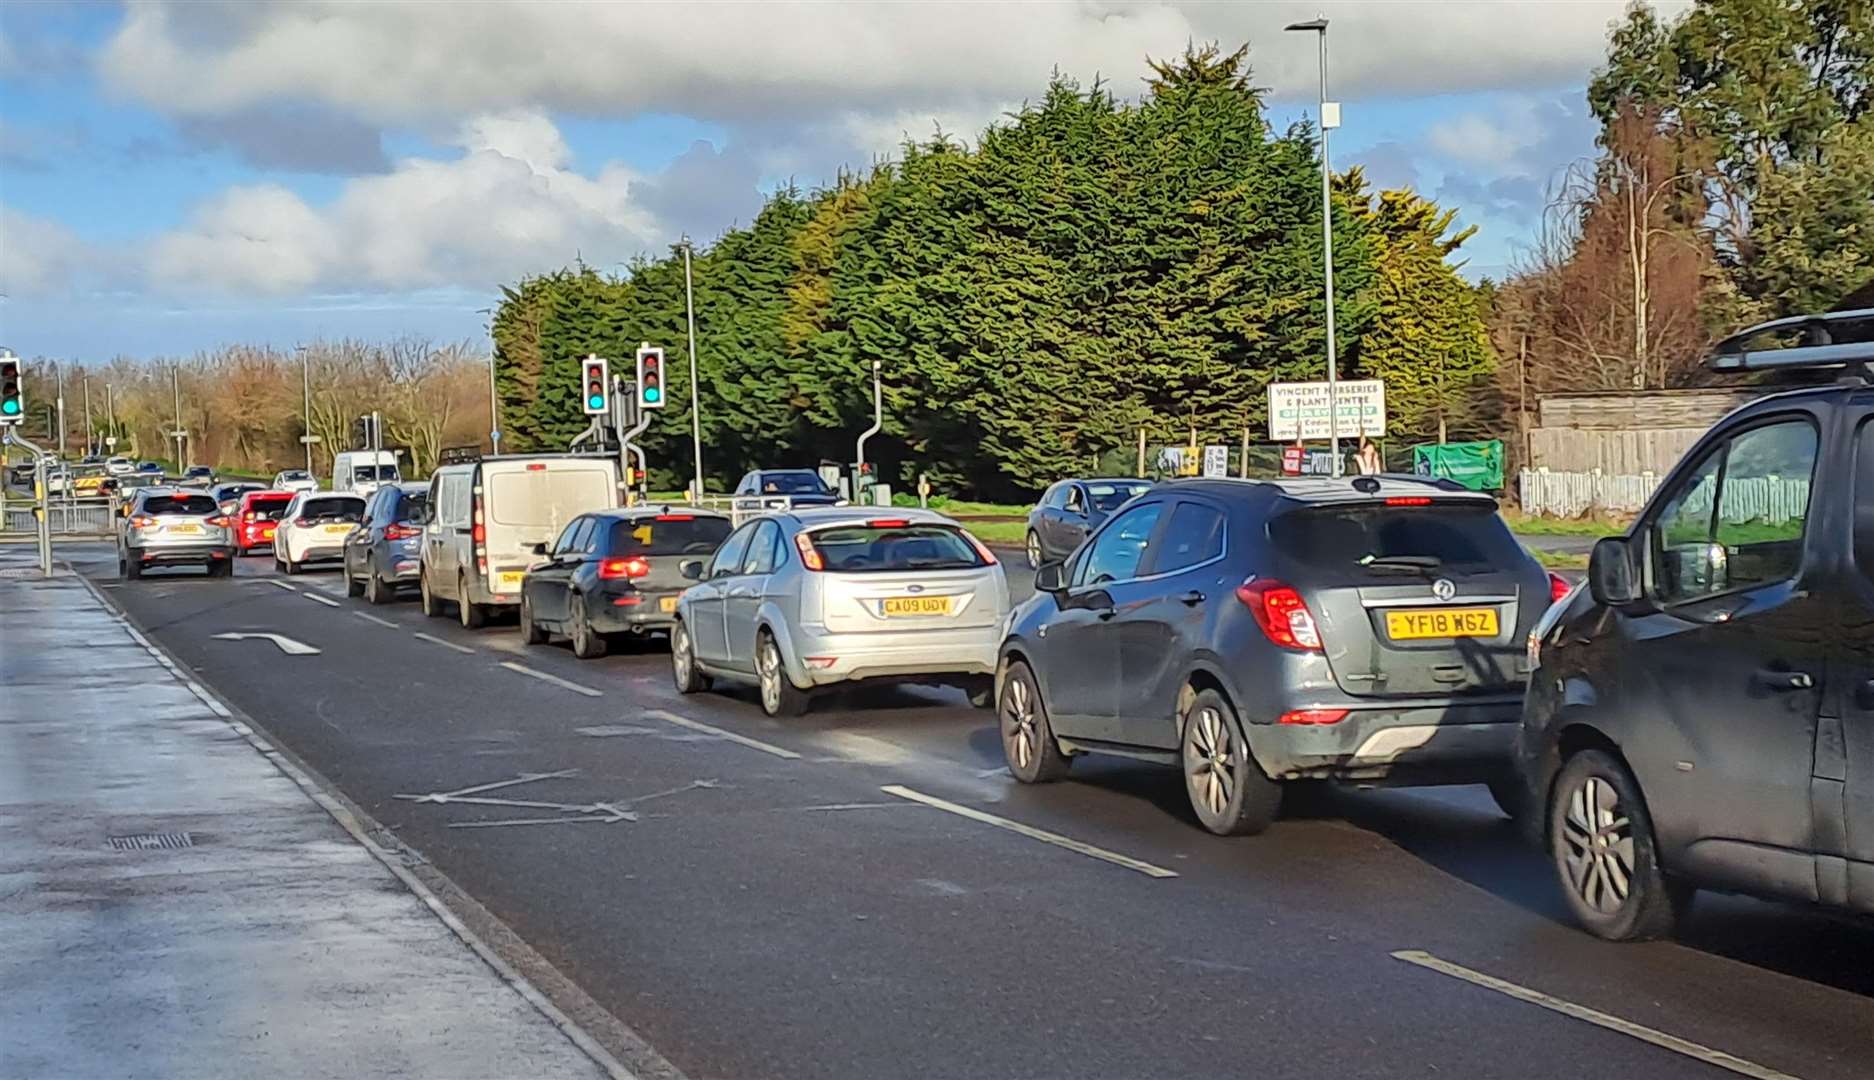 The Old Thanet Way was gridlocked on Monday morning